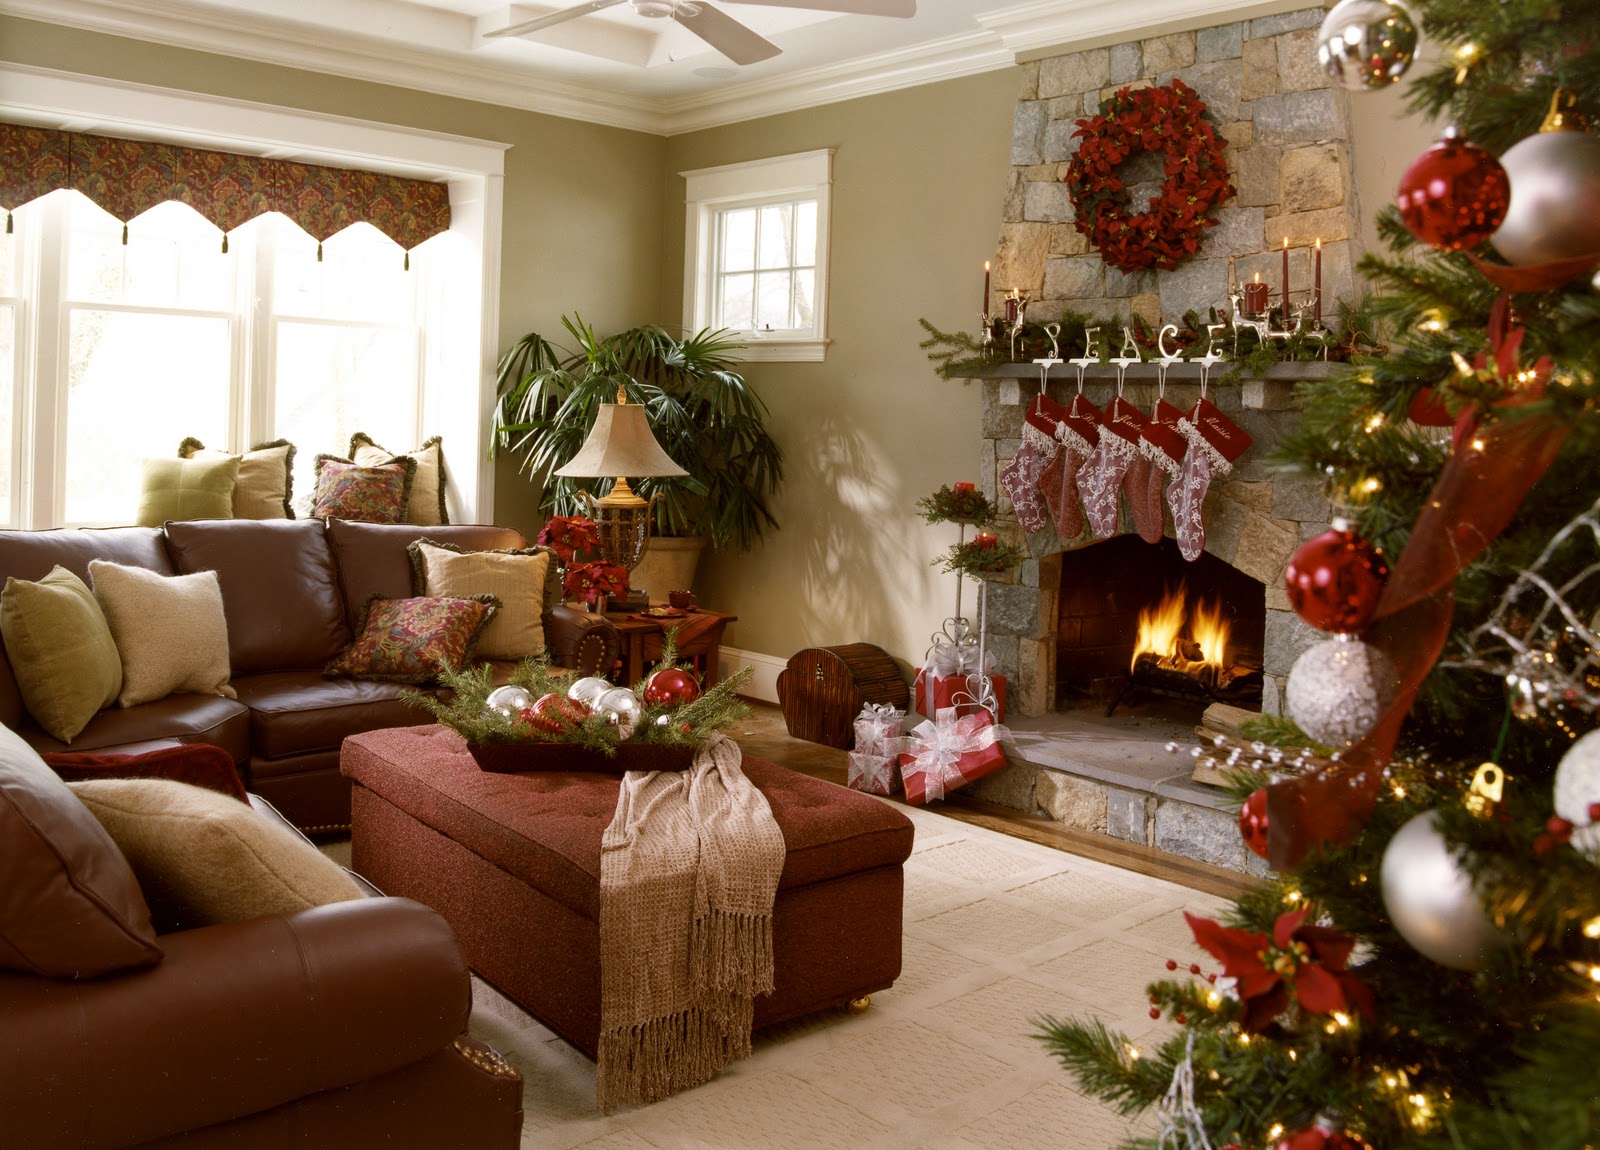 How To Decorate A Small Living Room For Christmas - 12 Ideas